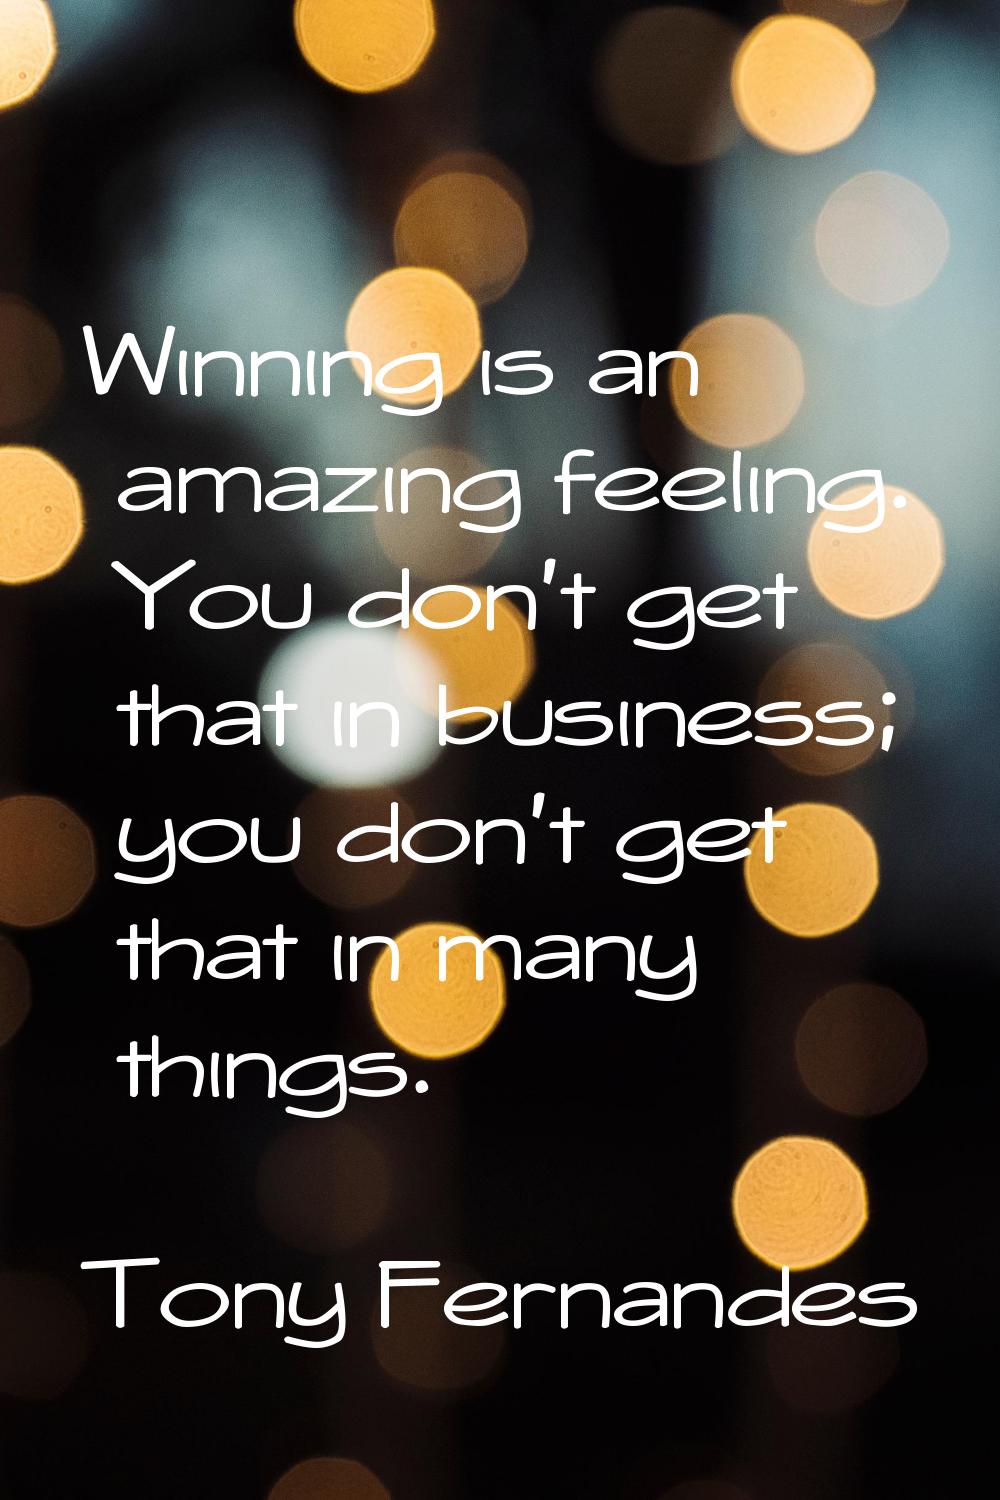 Winning is an amazing feeling. You don't get that in business; you don't get that in many things.